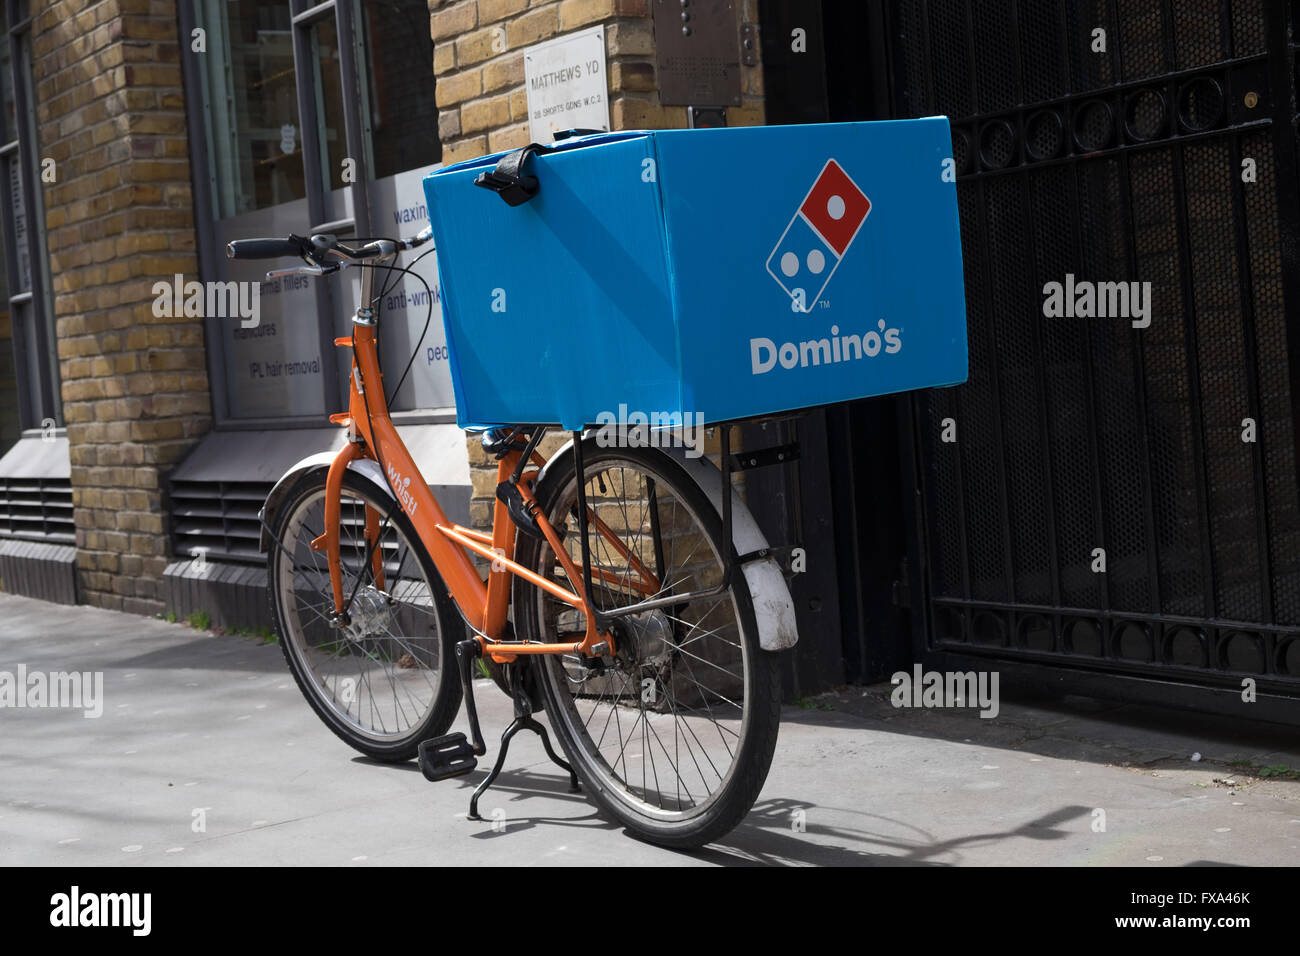 bicycle dominos